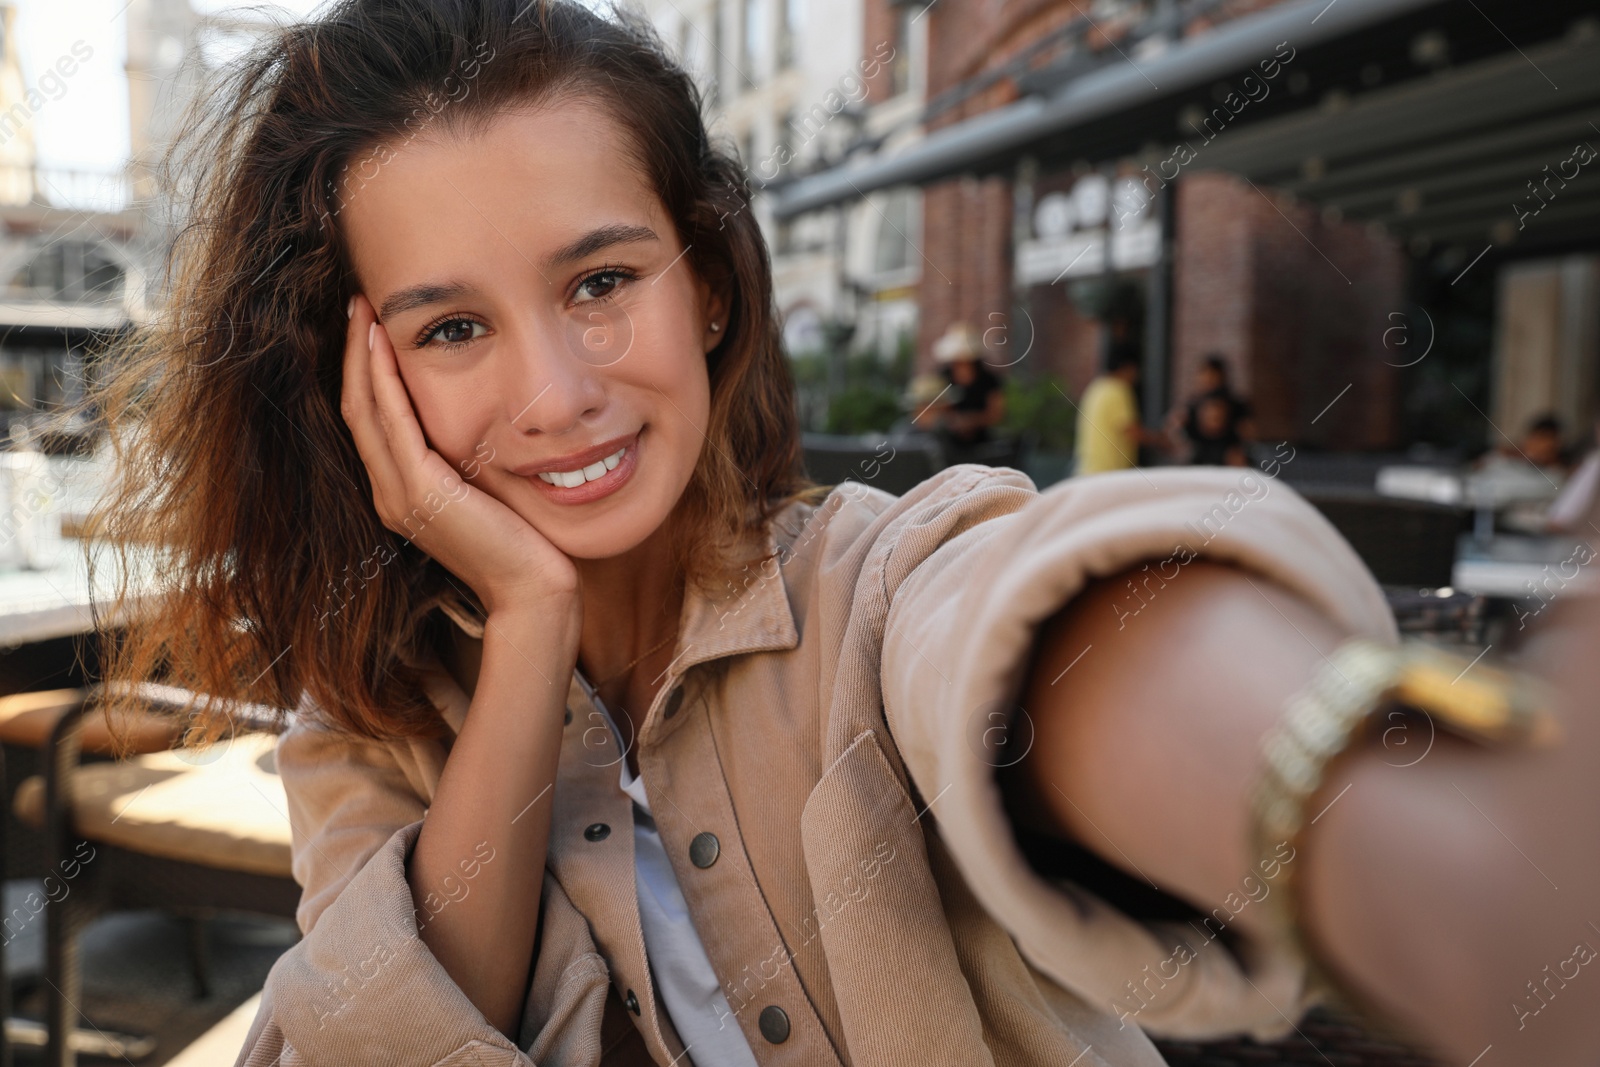 Photo of Happy young woman taking selfie in outdoor cafe